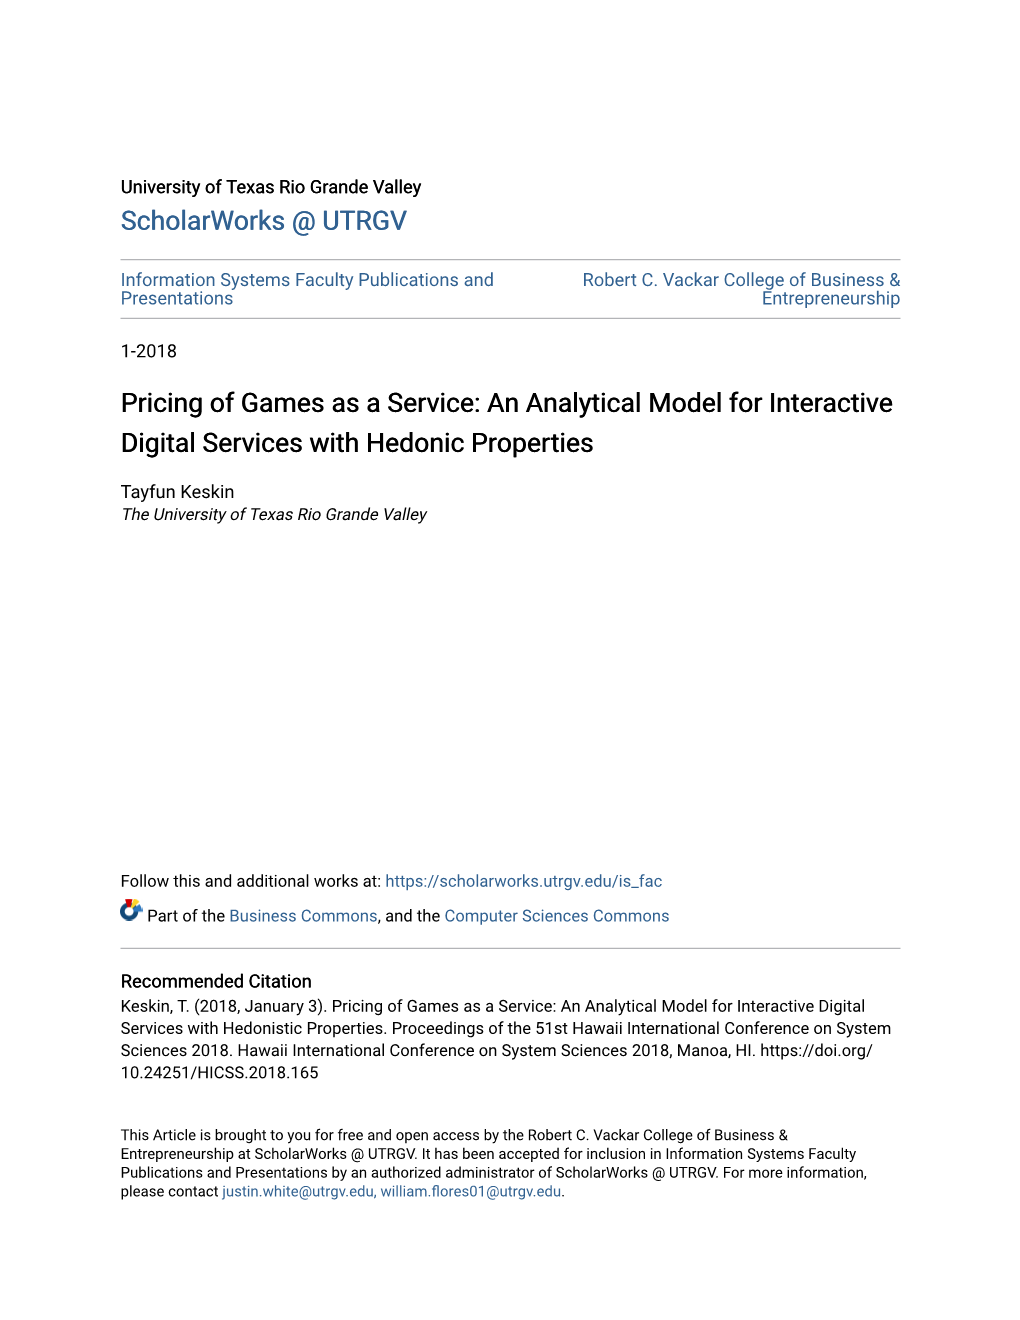 Pricing of Games As a Service: an Analytical Model for Interactive Digital Services with Hedonic Properties